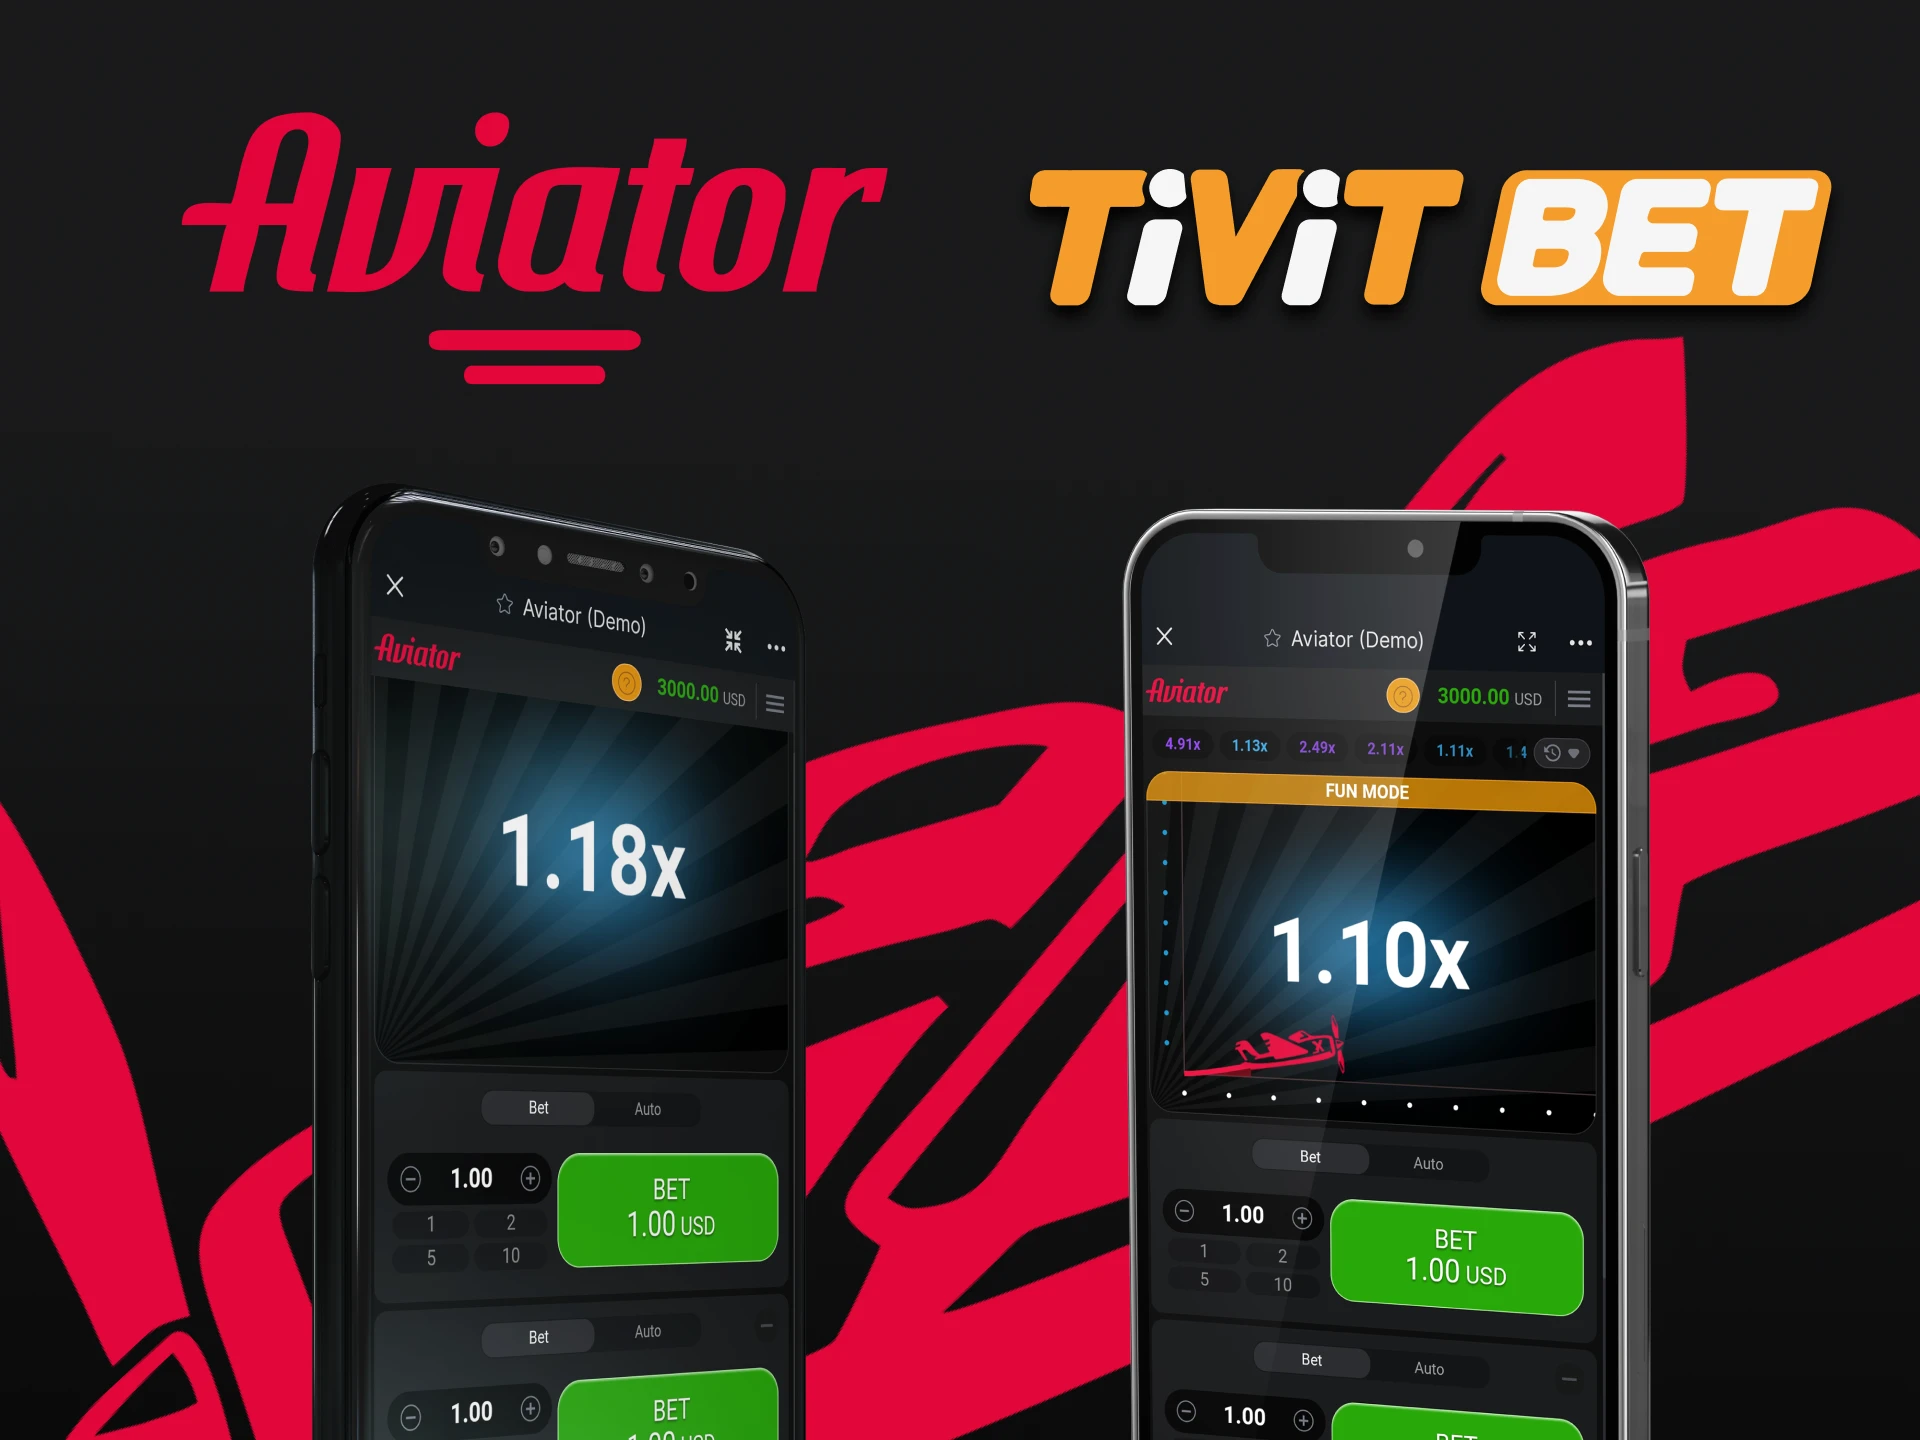 Choose your way to play Aviator on Tivitbet.